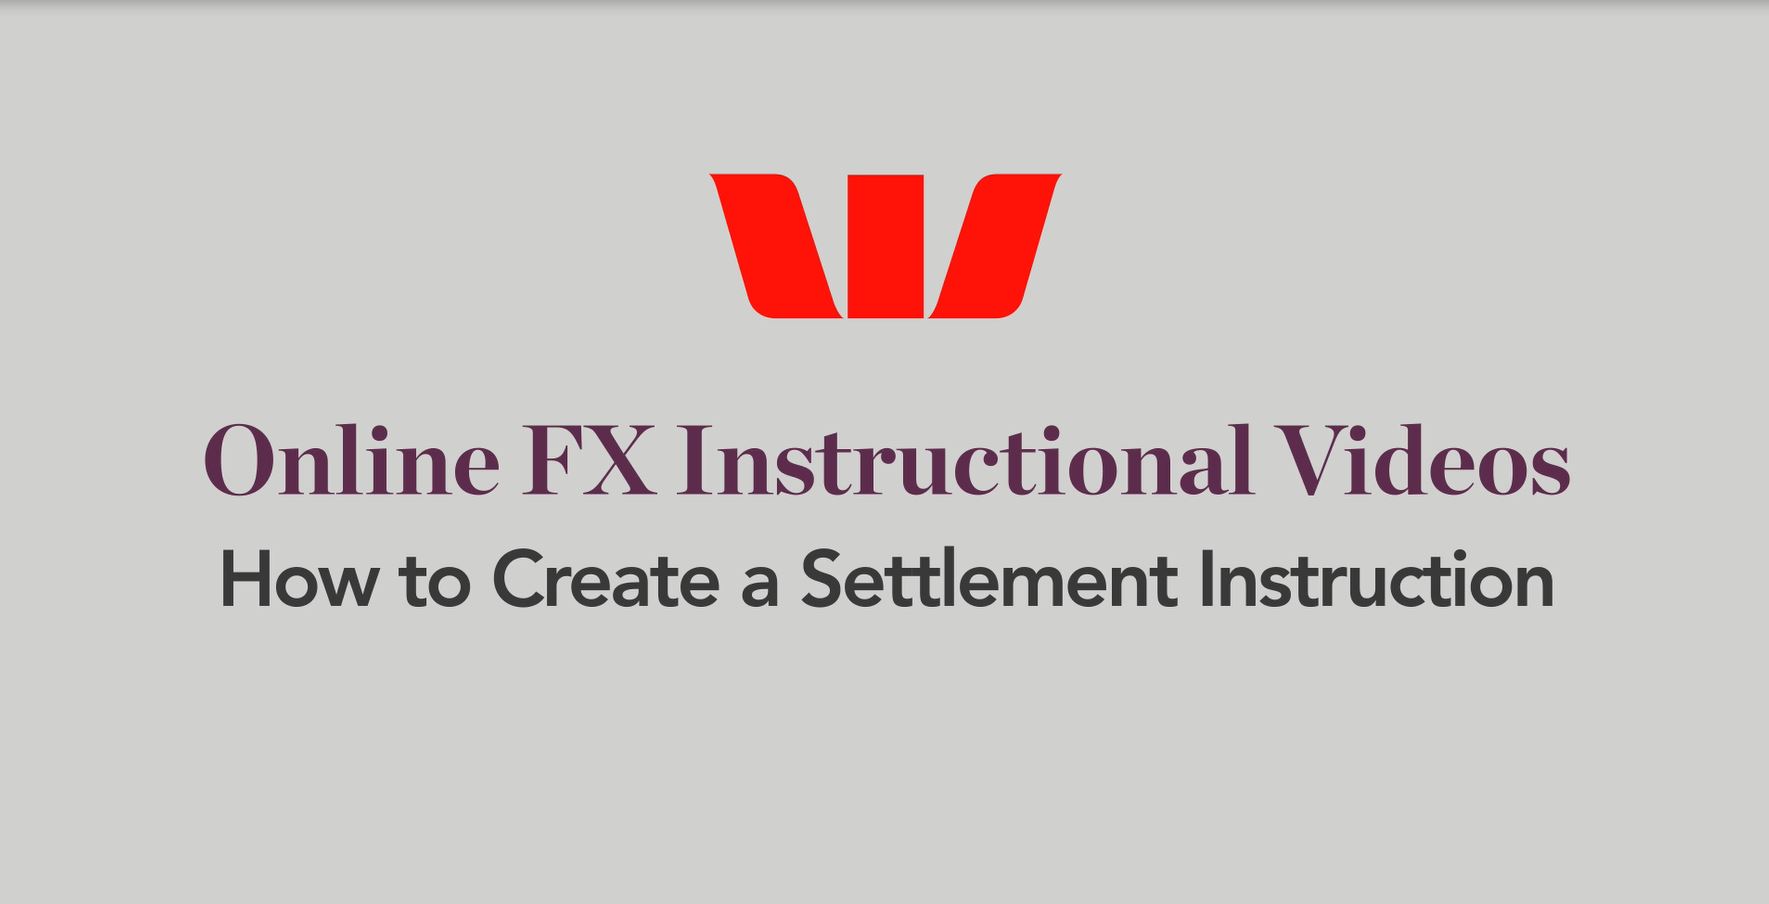 How to create a Settlement Instruction